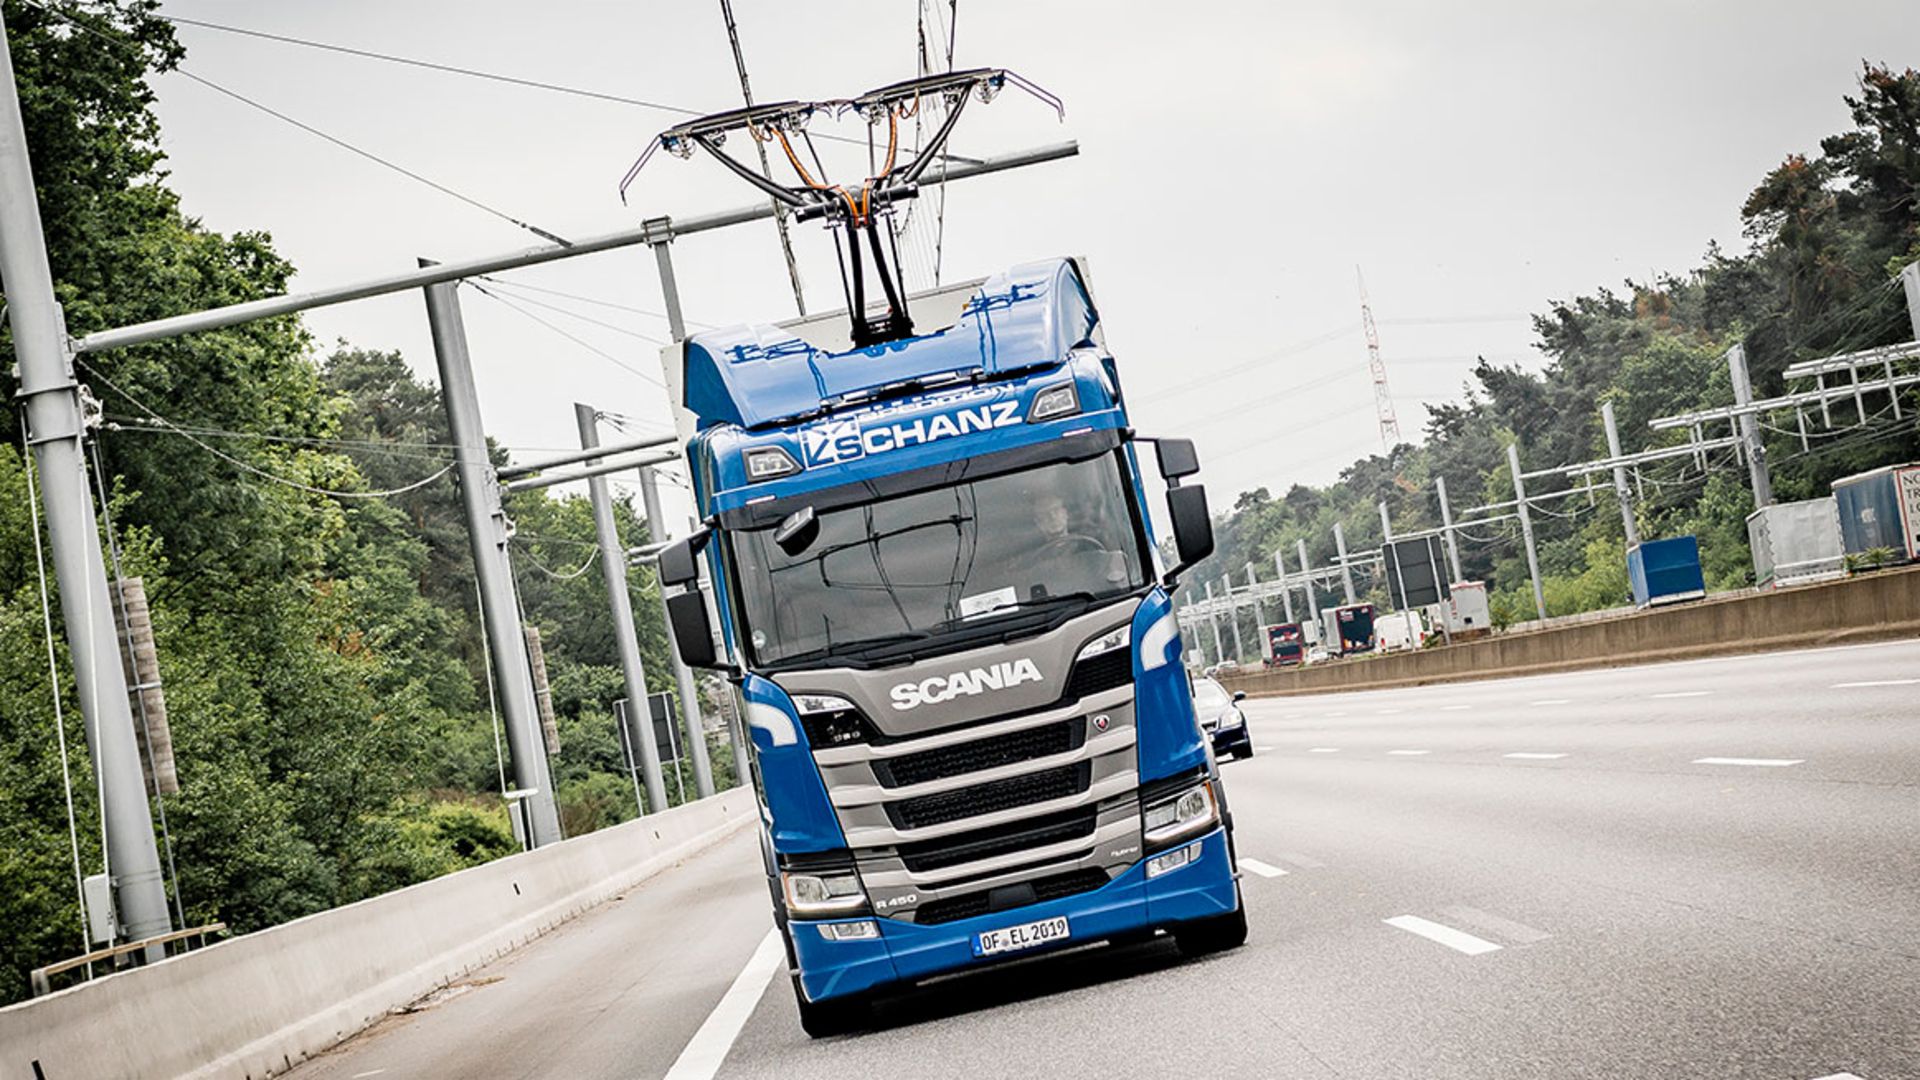 Scania has supplied 15 hybrid R 450 trucks for the field tests.